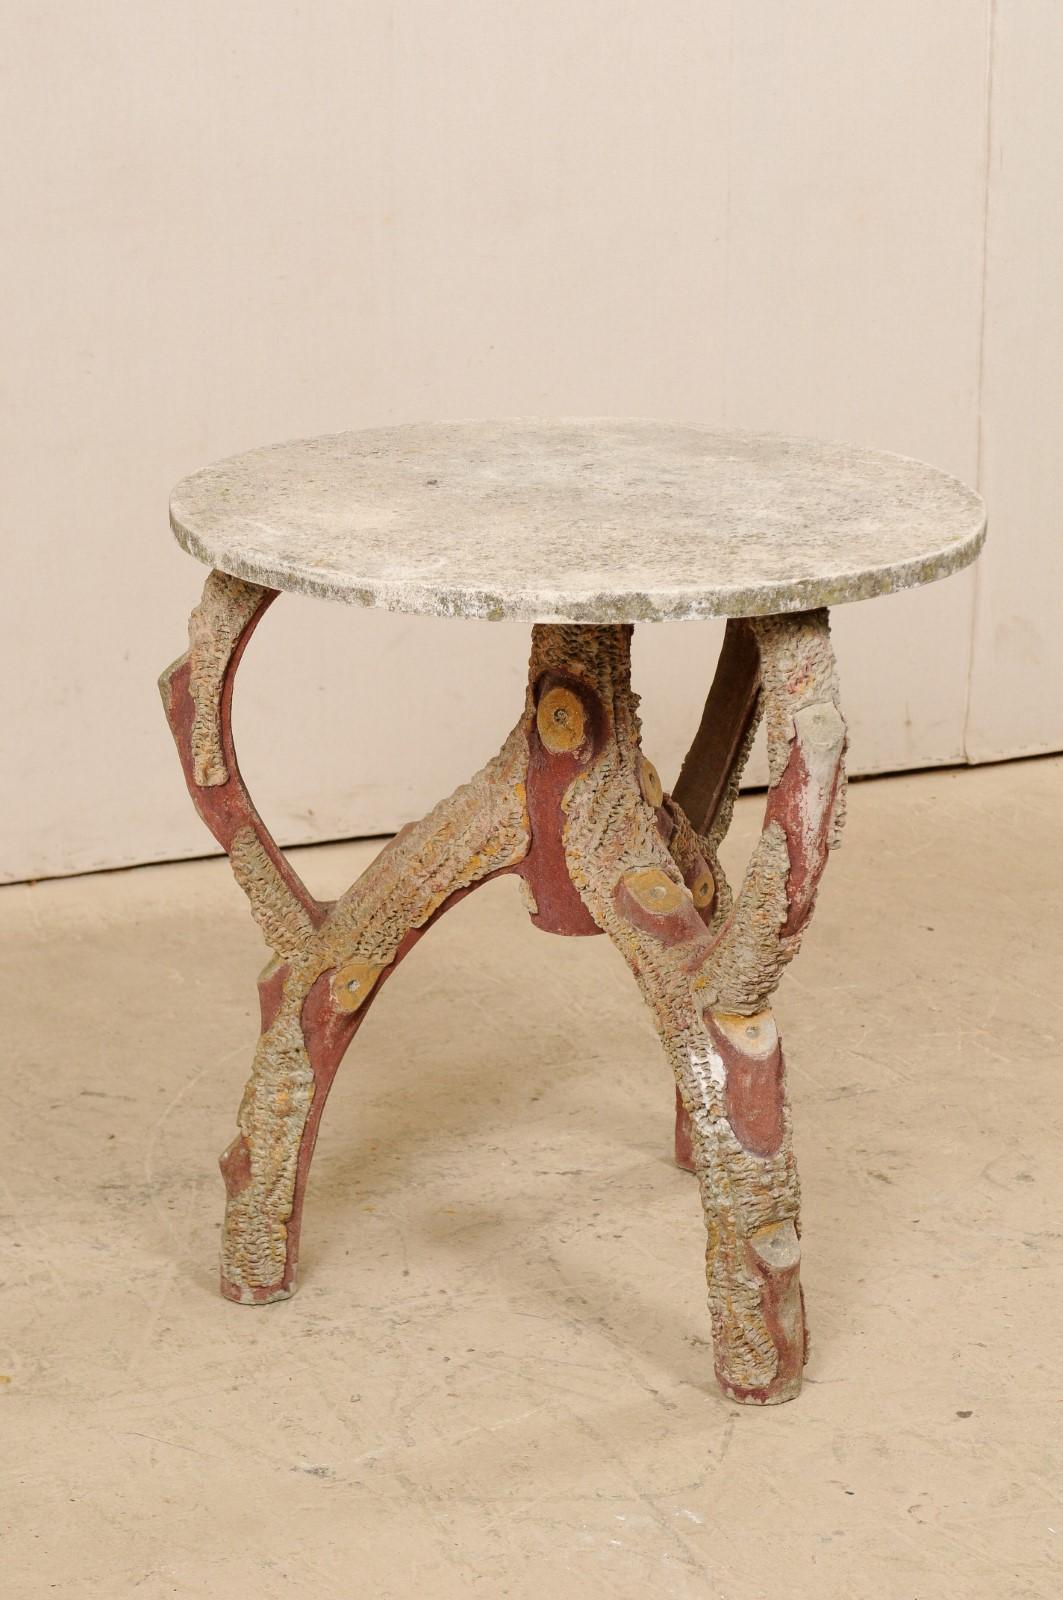 Concrete French Faux Bois Round Accent Table from the Mid-20th Century For Sale